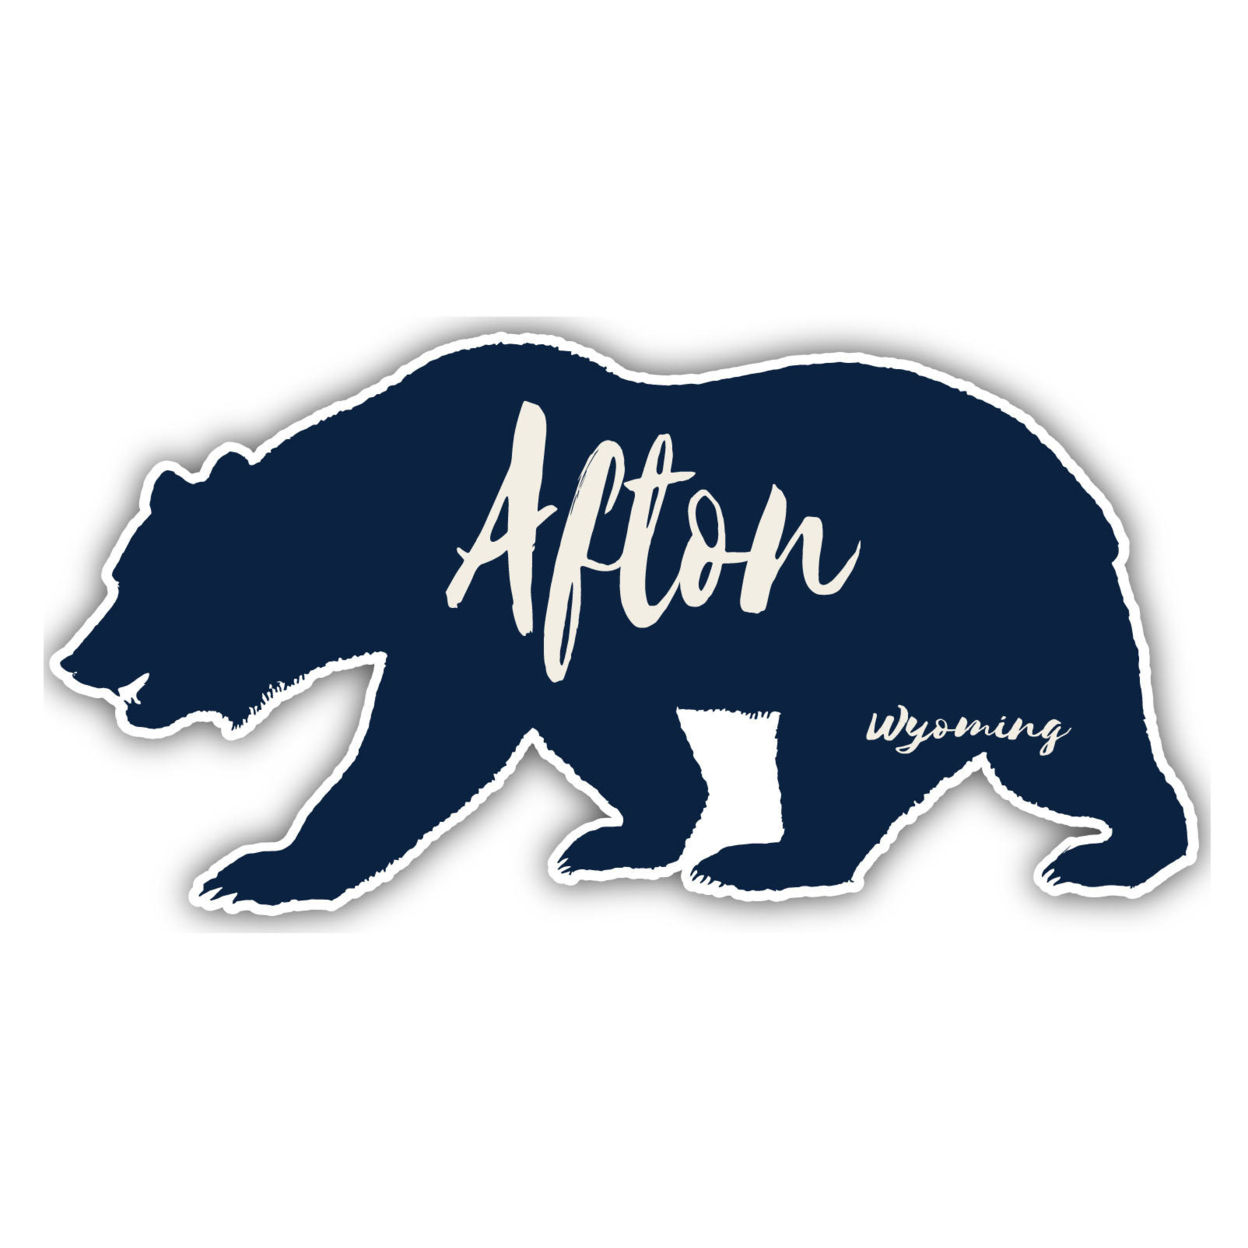 Afton Wyoming Souvenir Decorative Stickers (Choose Theme And Size) - Single Unit, 12-Inch, Bear